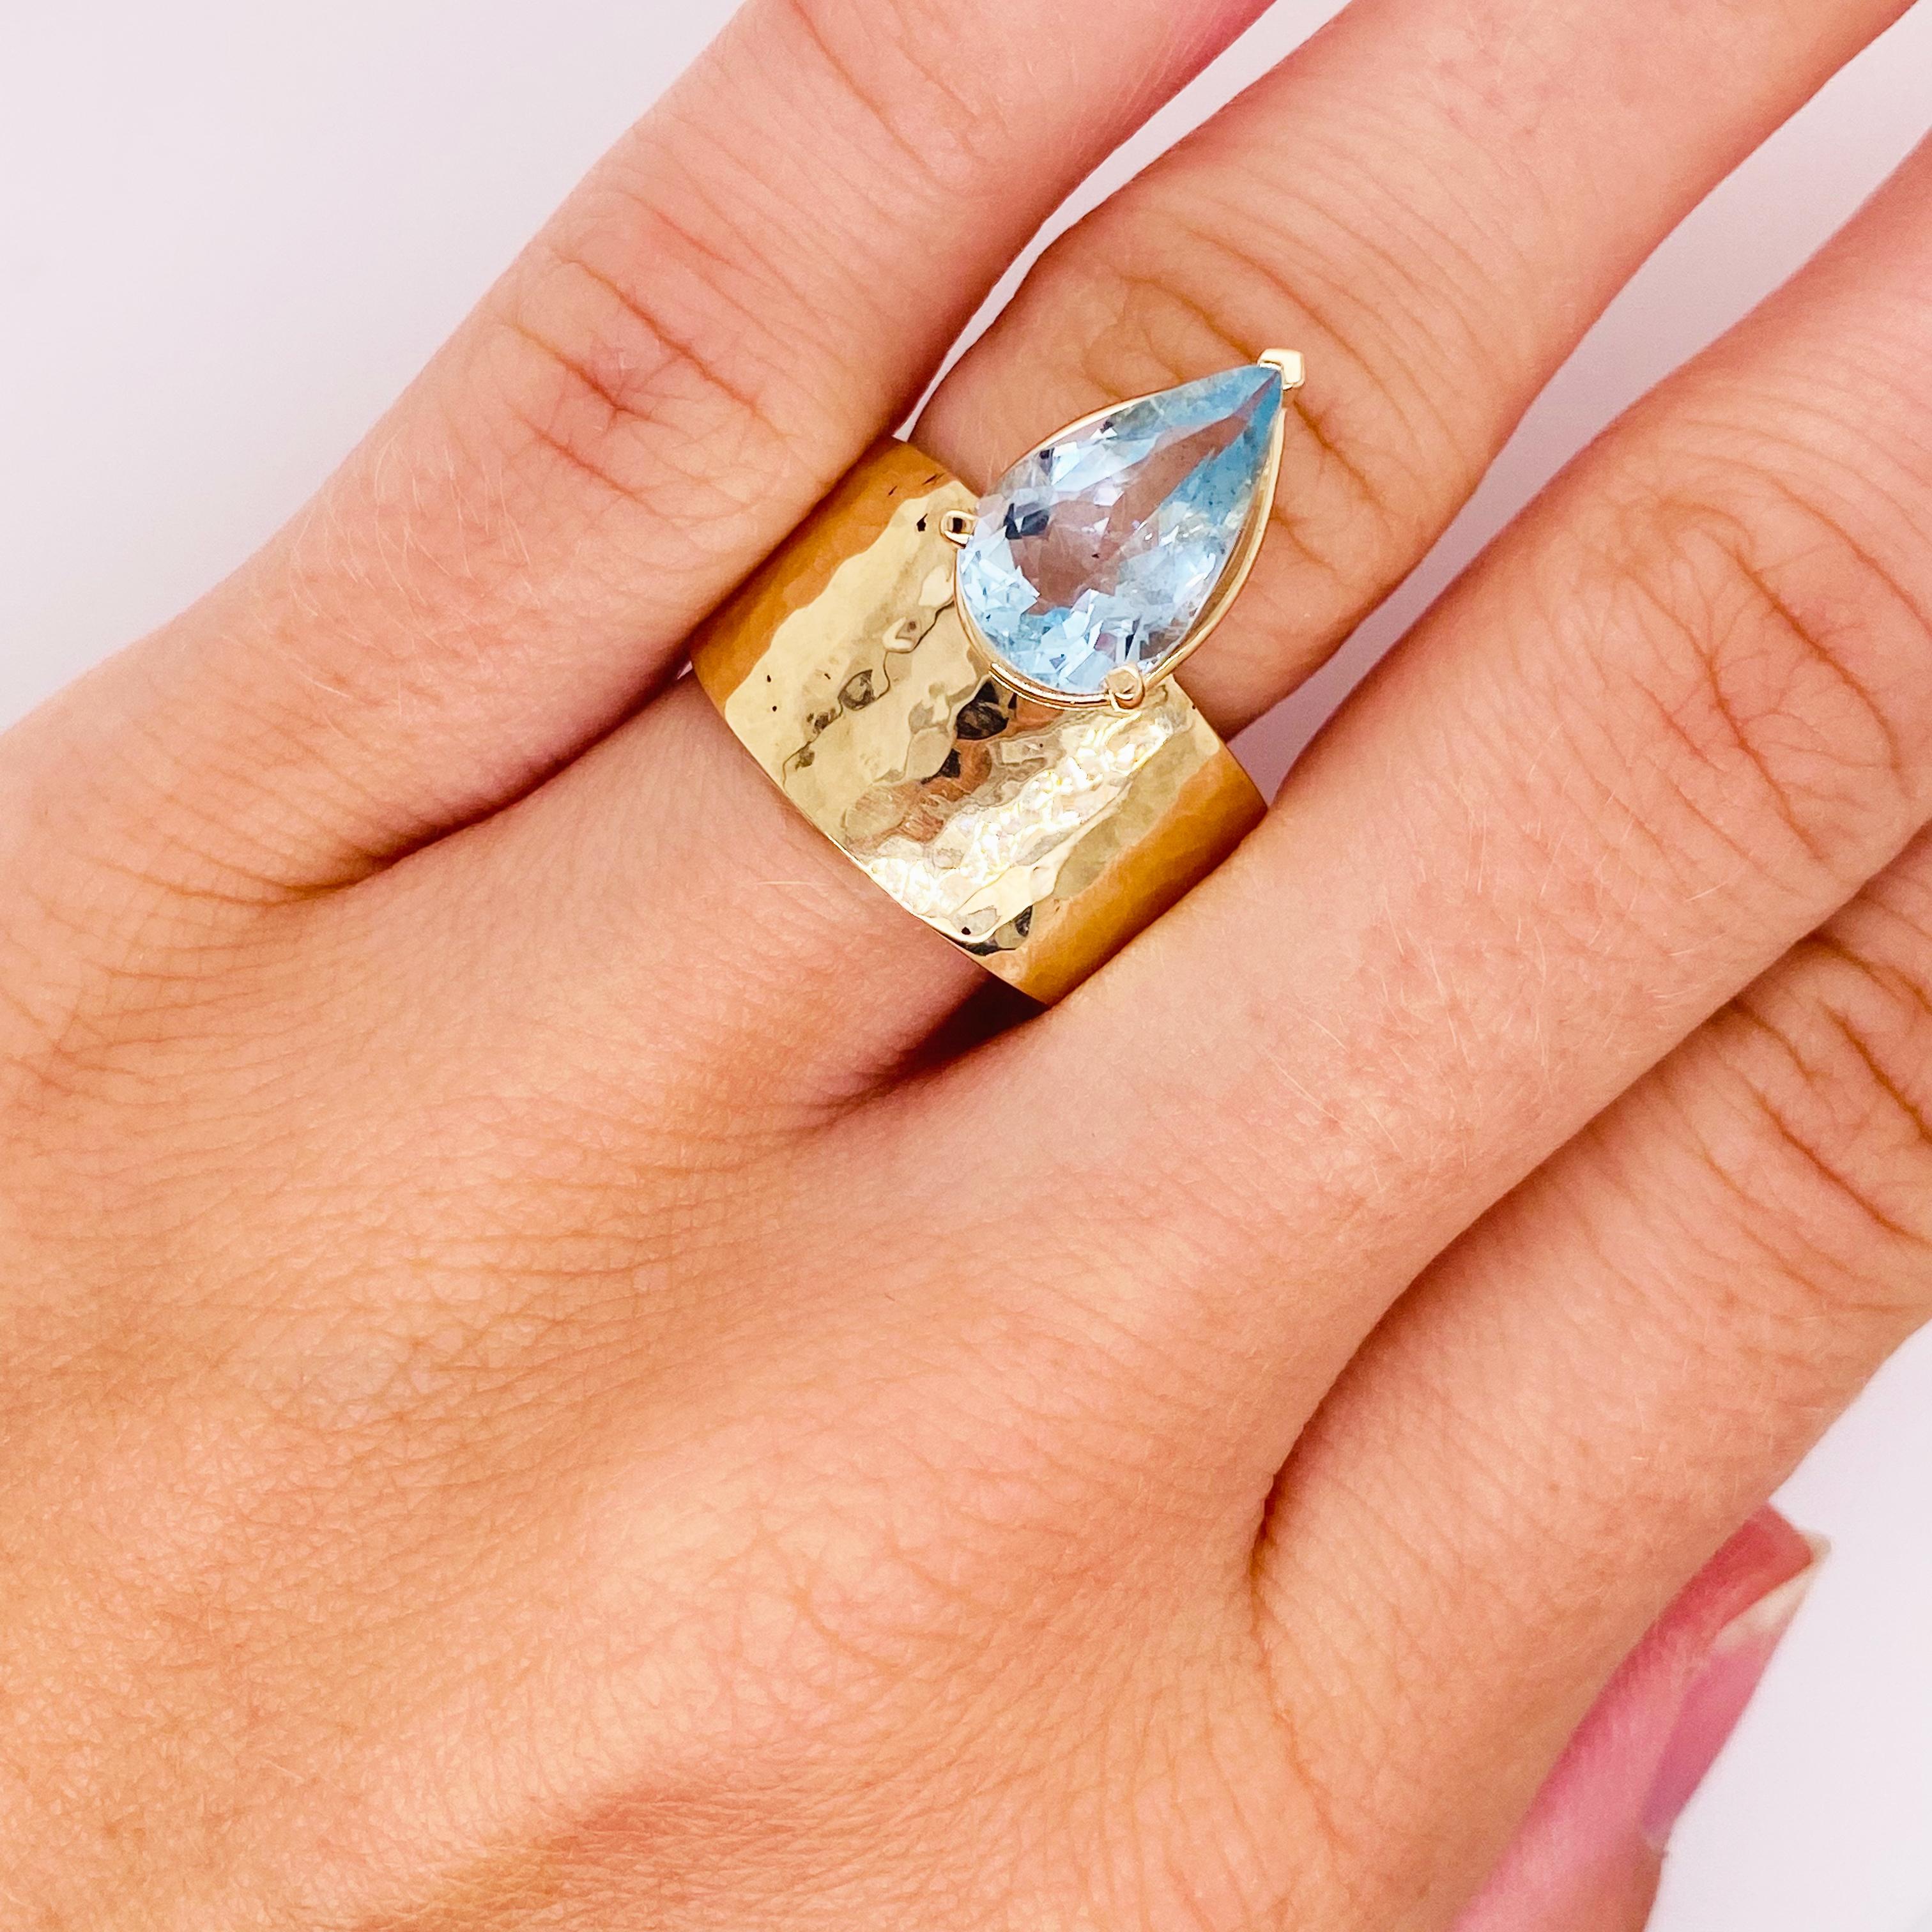 Unique, asymmetrical, custom made ring! Fantastic on larger fingers! Feel like royalty while wearing this ring!
Gemstone: Aquamarine (natural and genuine mined from Brazil)
Carats Weight: 2.69 Carats 
Gemstone Shape: Pear
Ring Size: 8.5 (can be